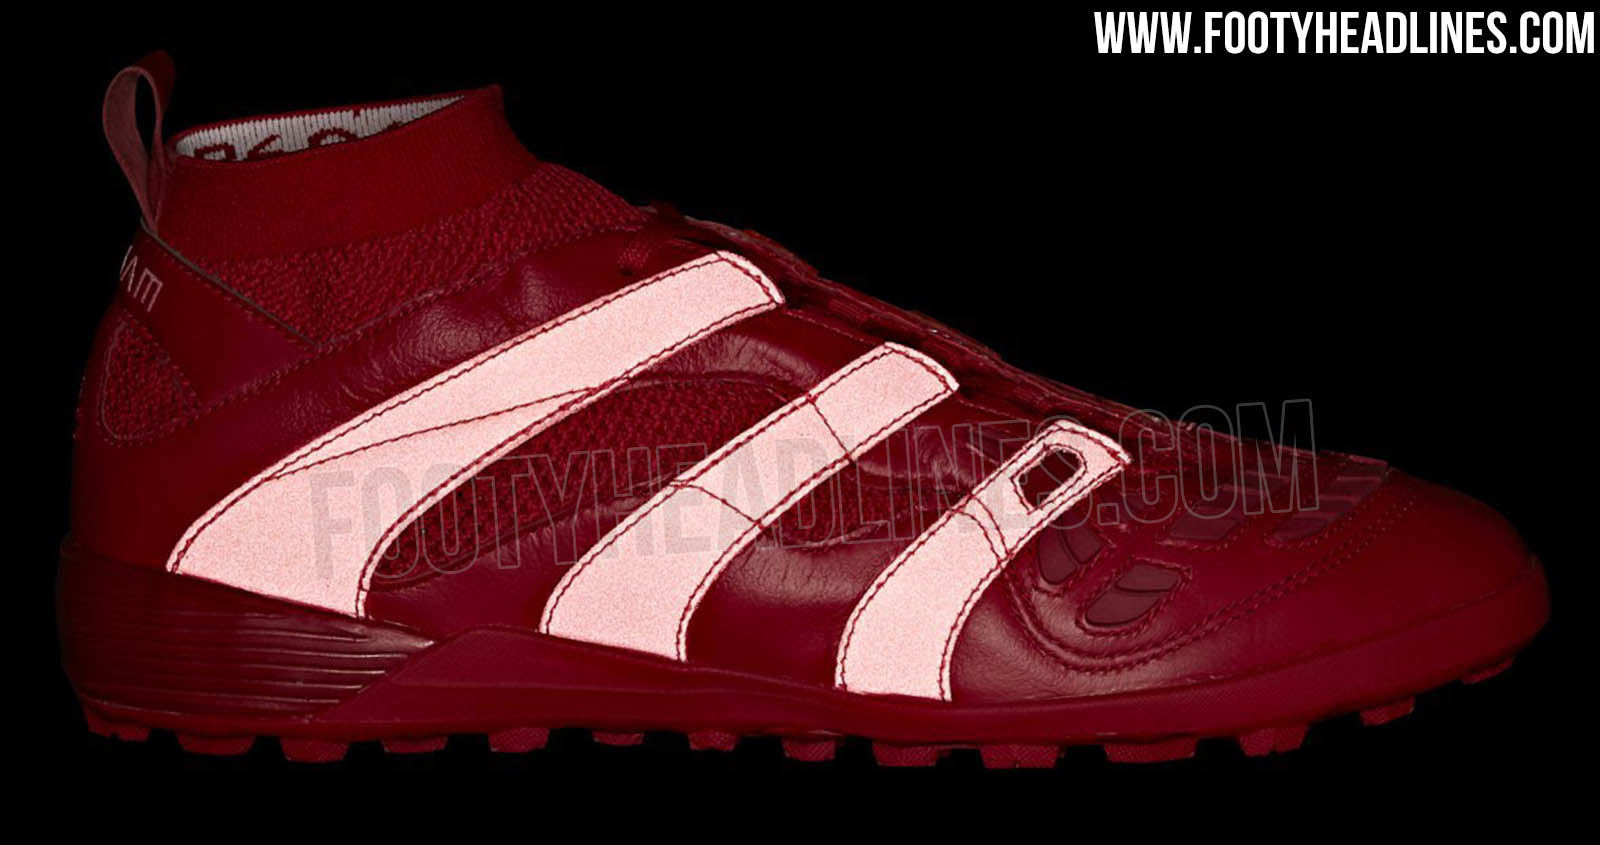 familia Supervivencia Popa EXCLUSIVE: All-Red Adidas Predator Accelerator Beckham 2017 Boots Leaked -  Footy Headlines